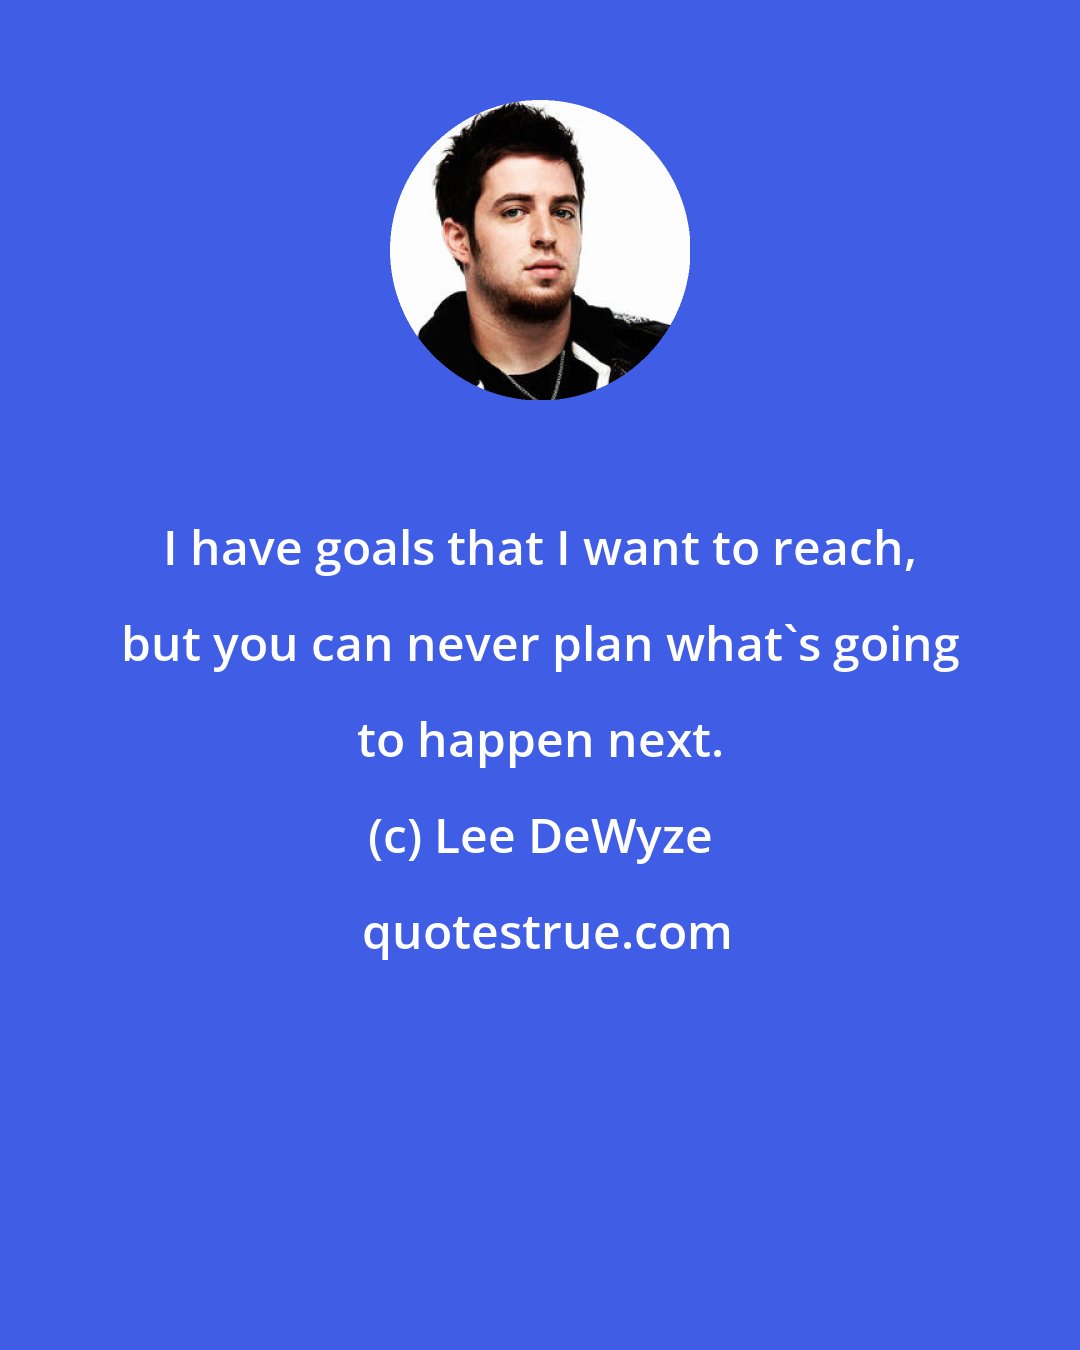 Lee DeWyze: I have goals that I want to reach, but you can never plan what's going to happen next.